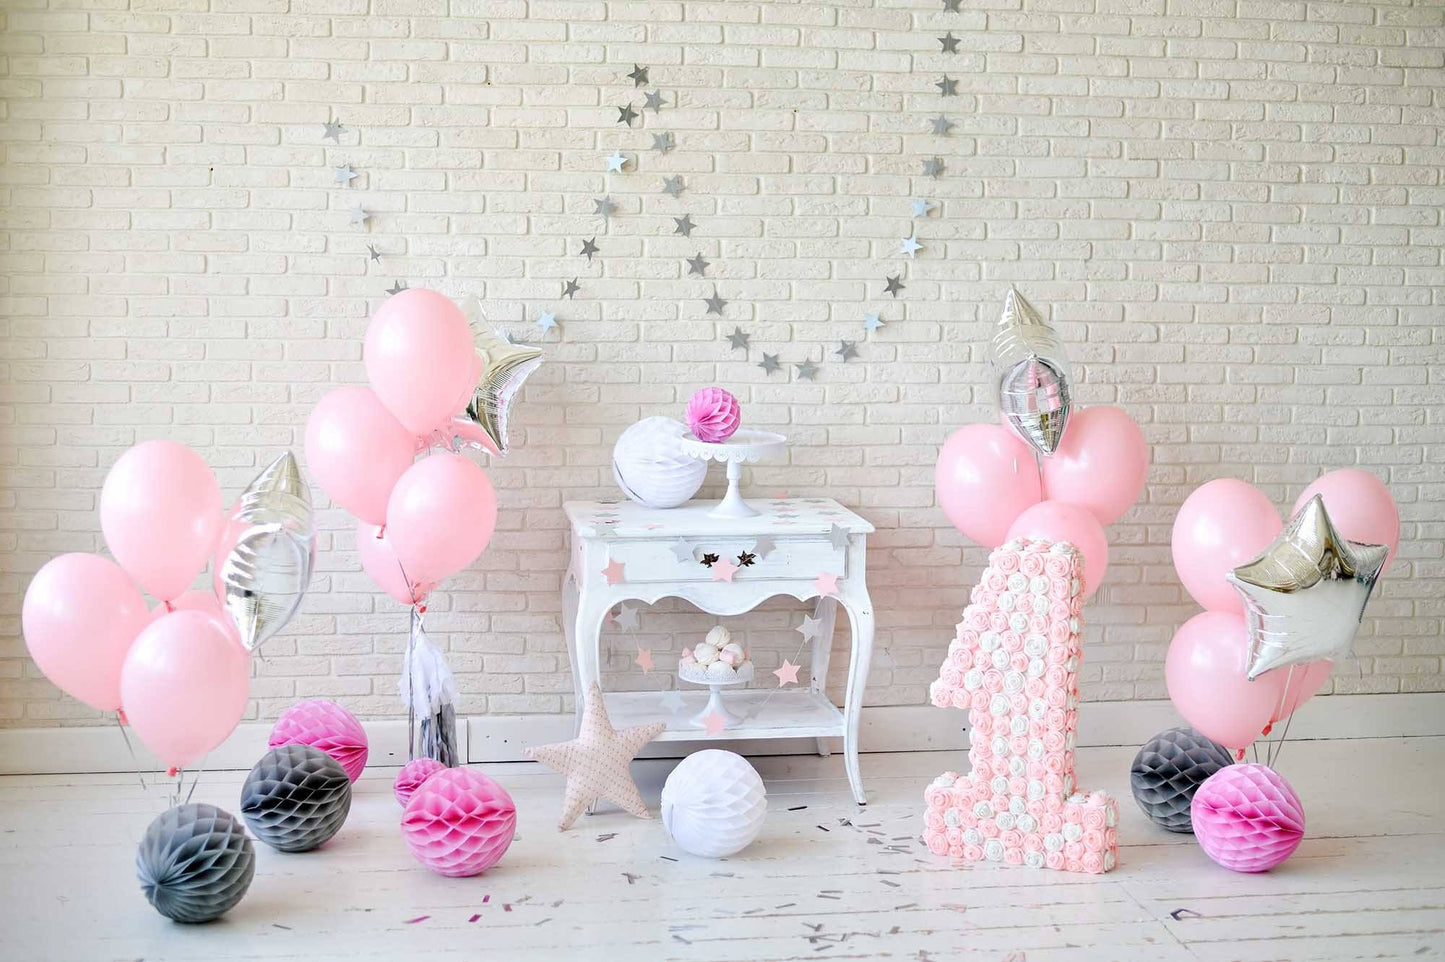 Milk White Brick Wall With Pink Balloons On Wood Floor For Baby 1 Birthday Backdrop Shopbackdrop